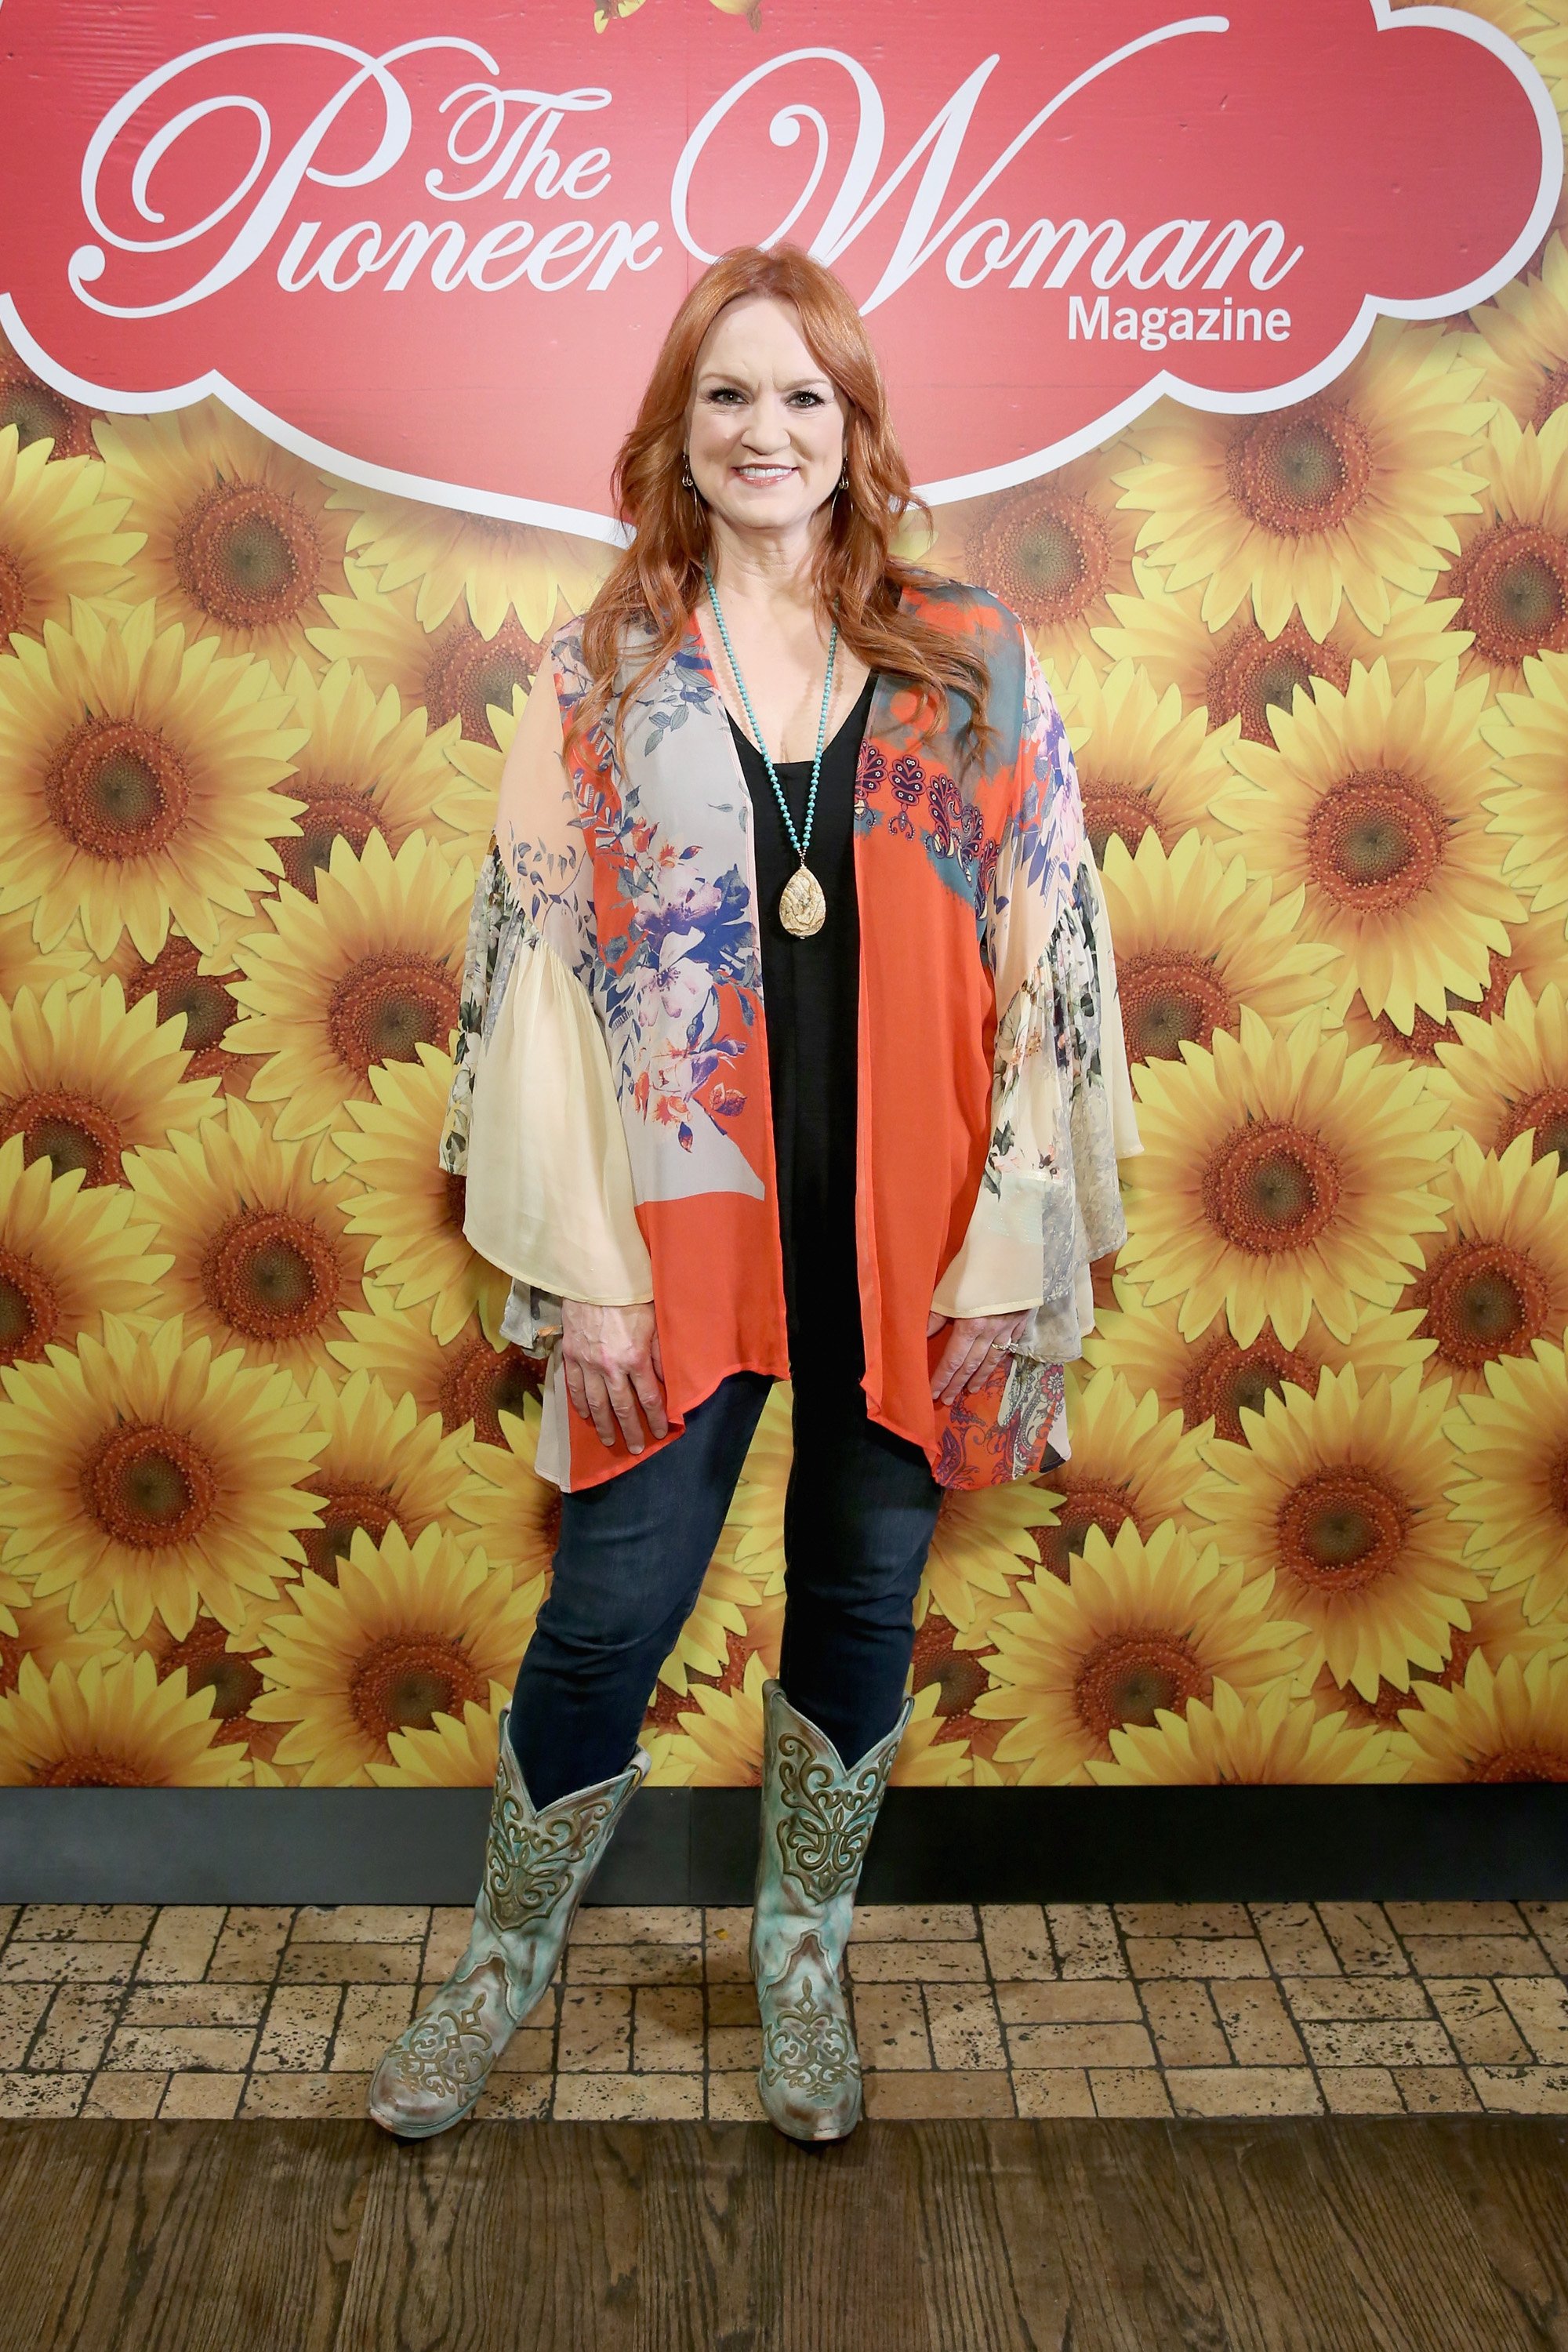 Ree Drummond attends The Pioneer Woman Magazine Celebration on June 6, 2017, in New York City. | Source: Getty Images.